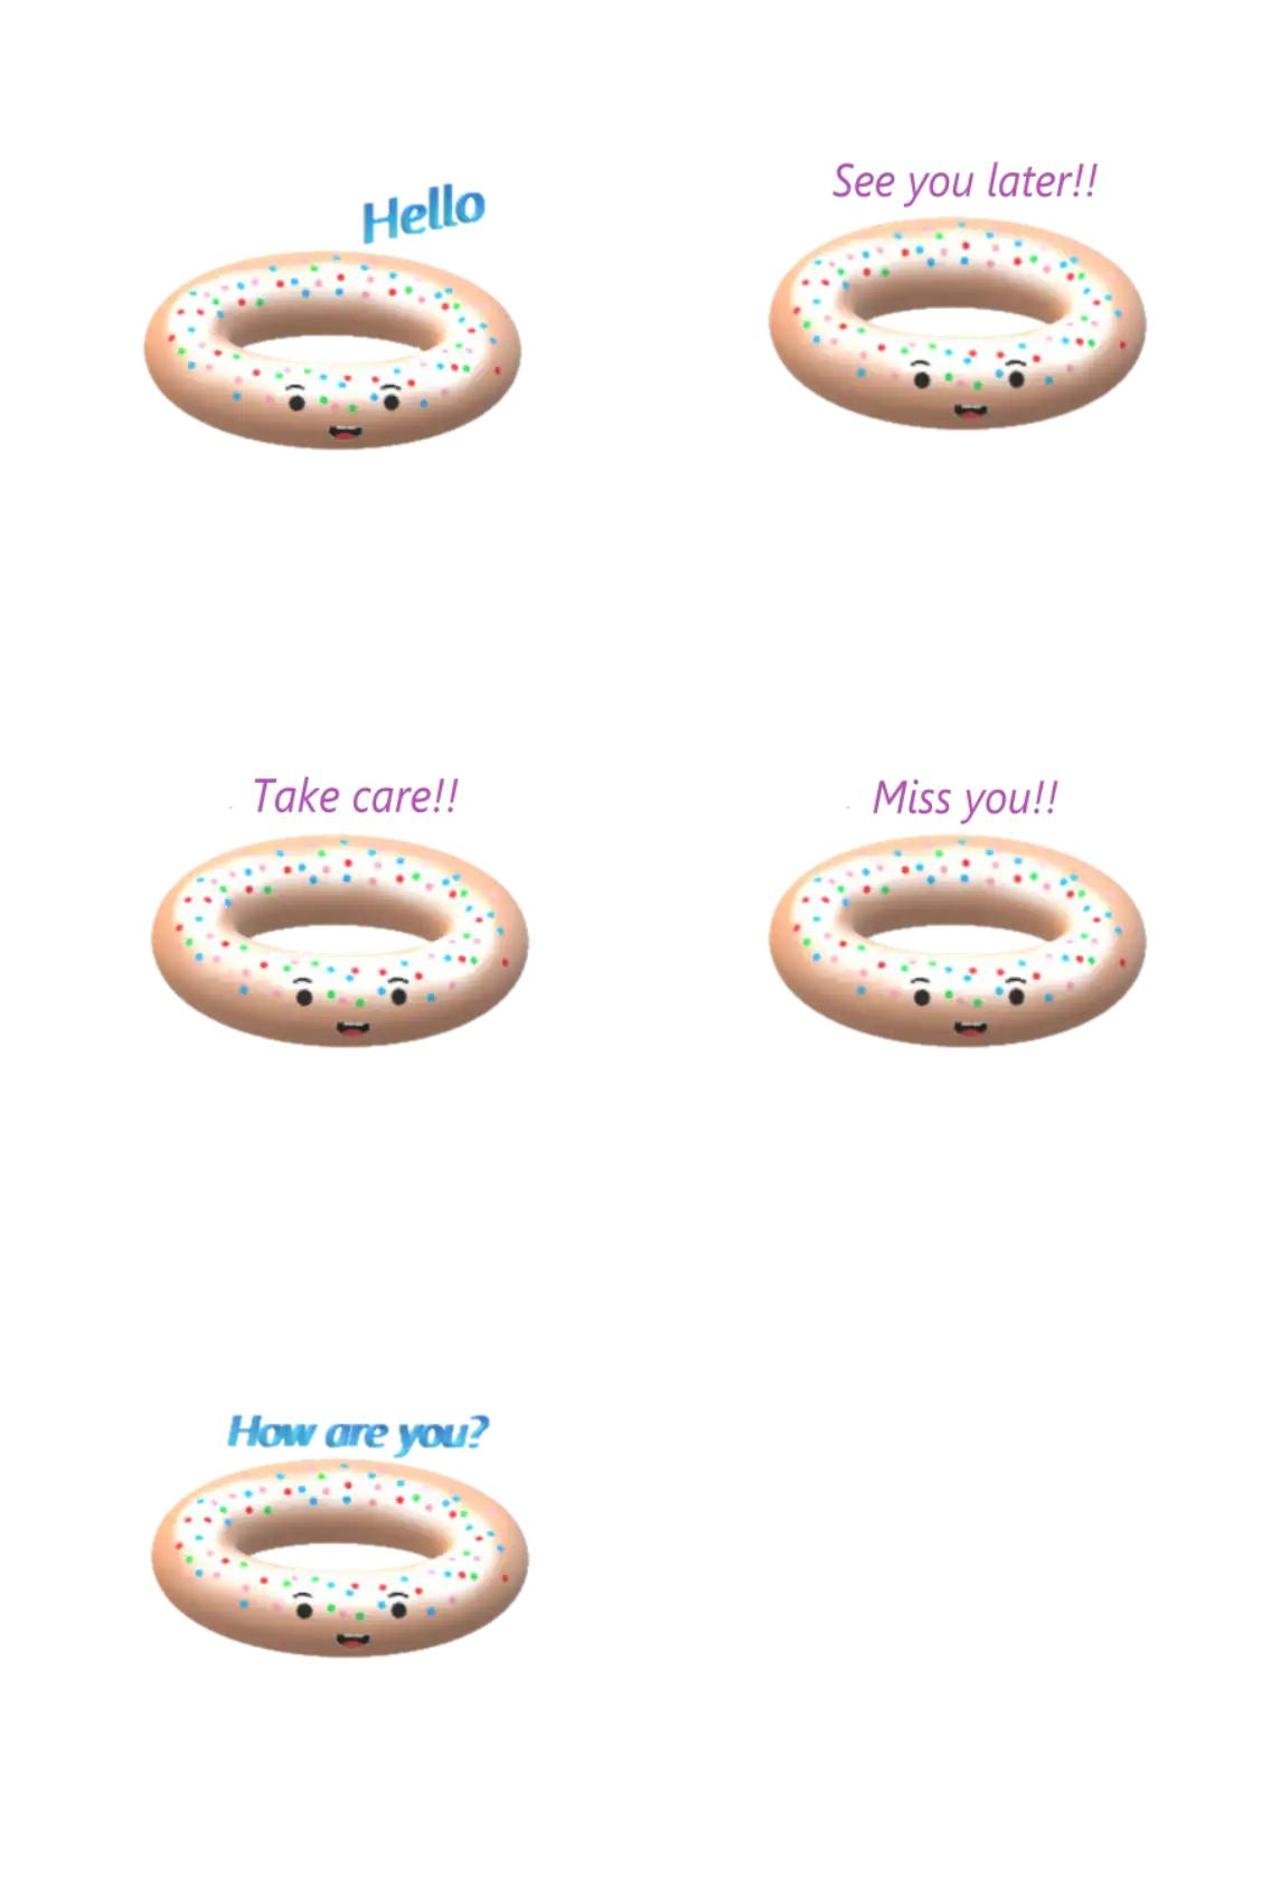 Doughnuts Animation/Cartoon,Food/Drink sticker pack for Whatsapp, Telegram, Signal, and others chatting and message apps